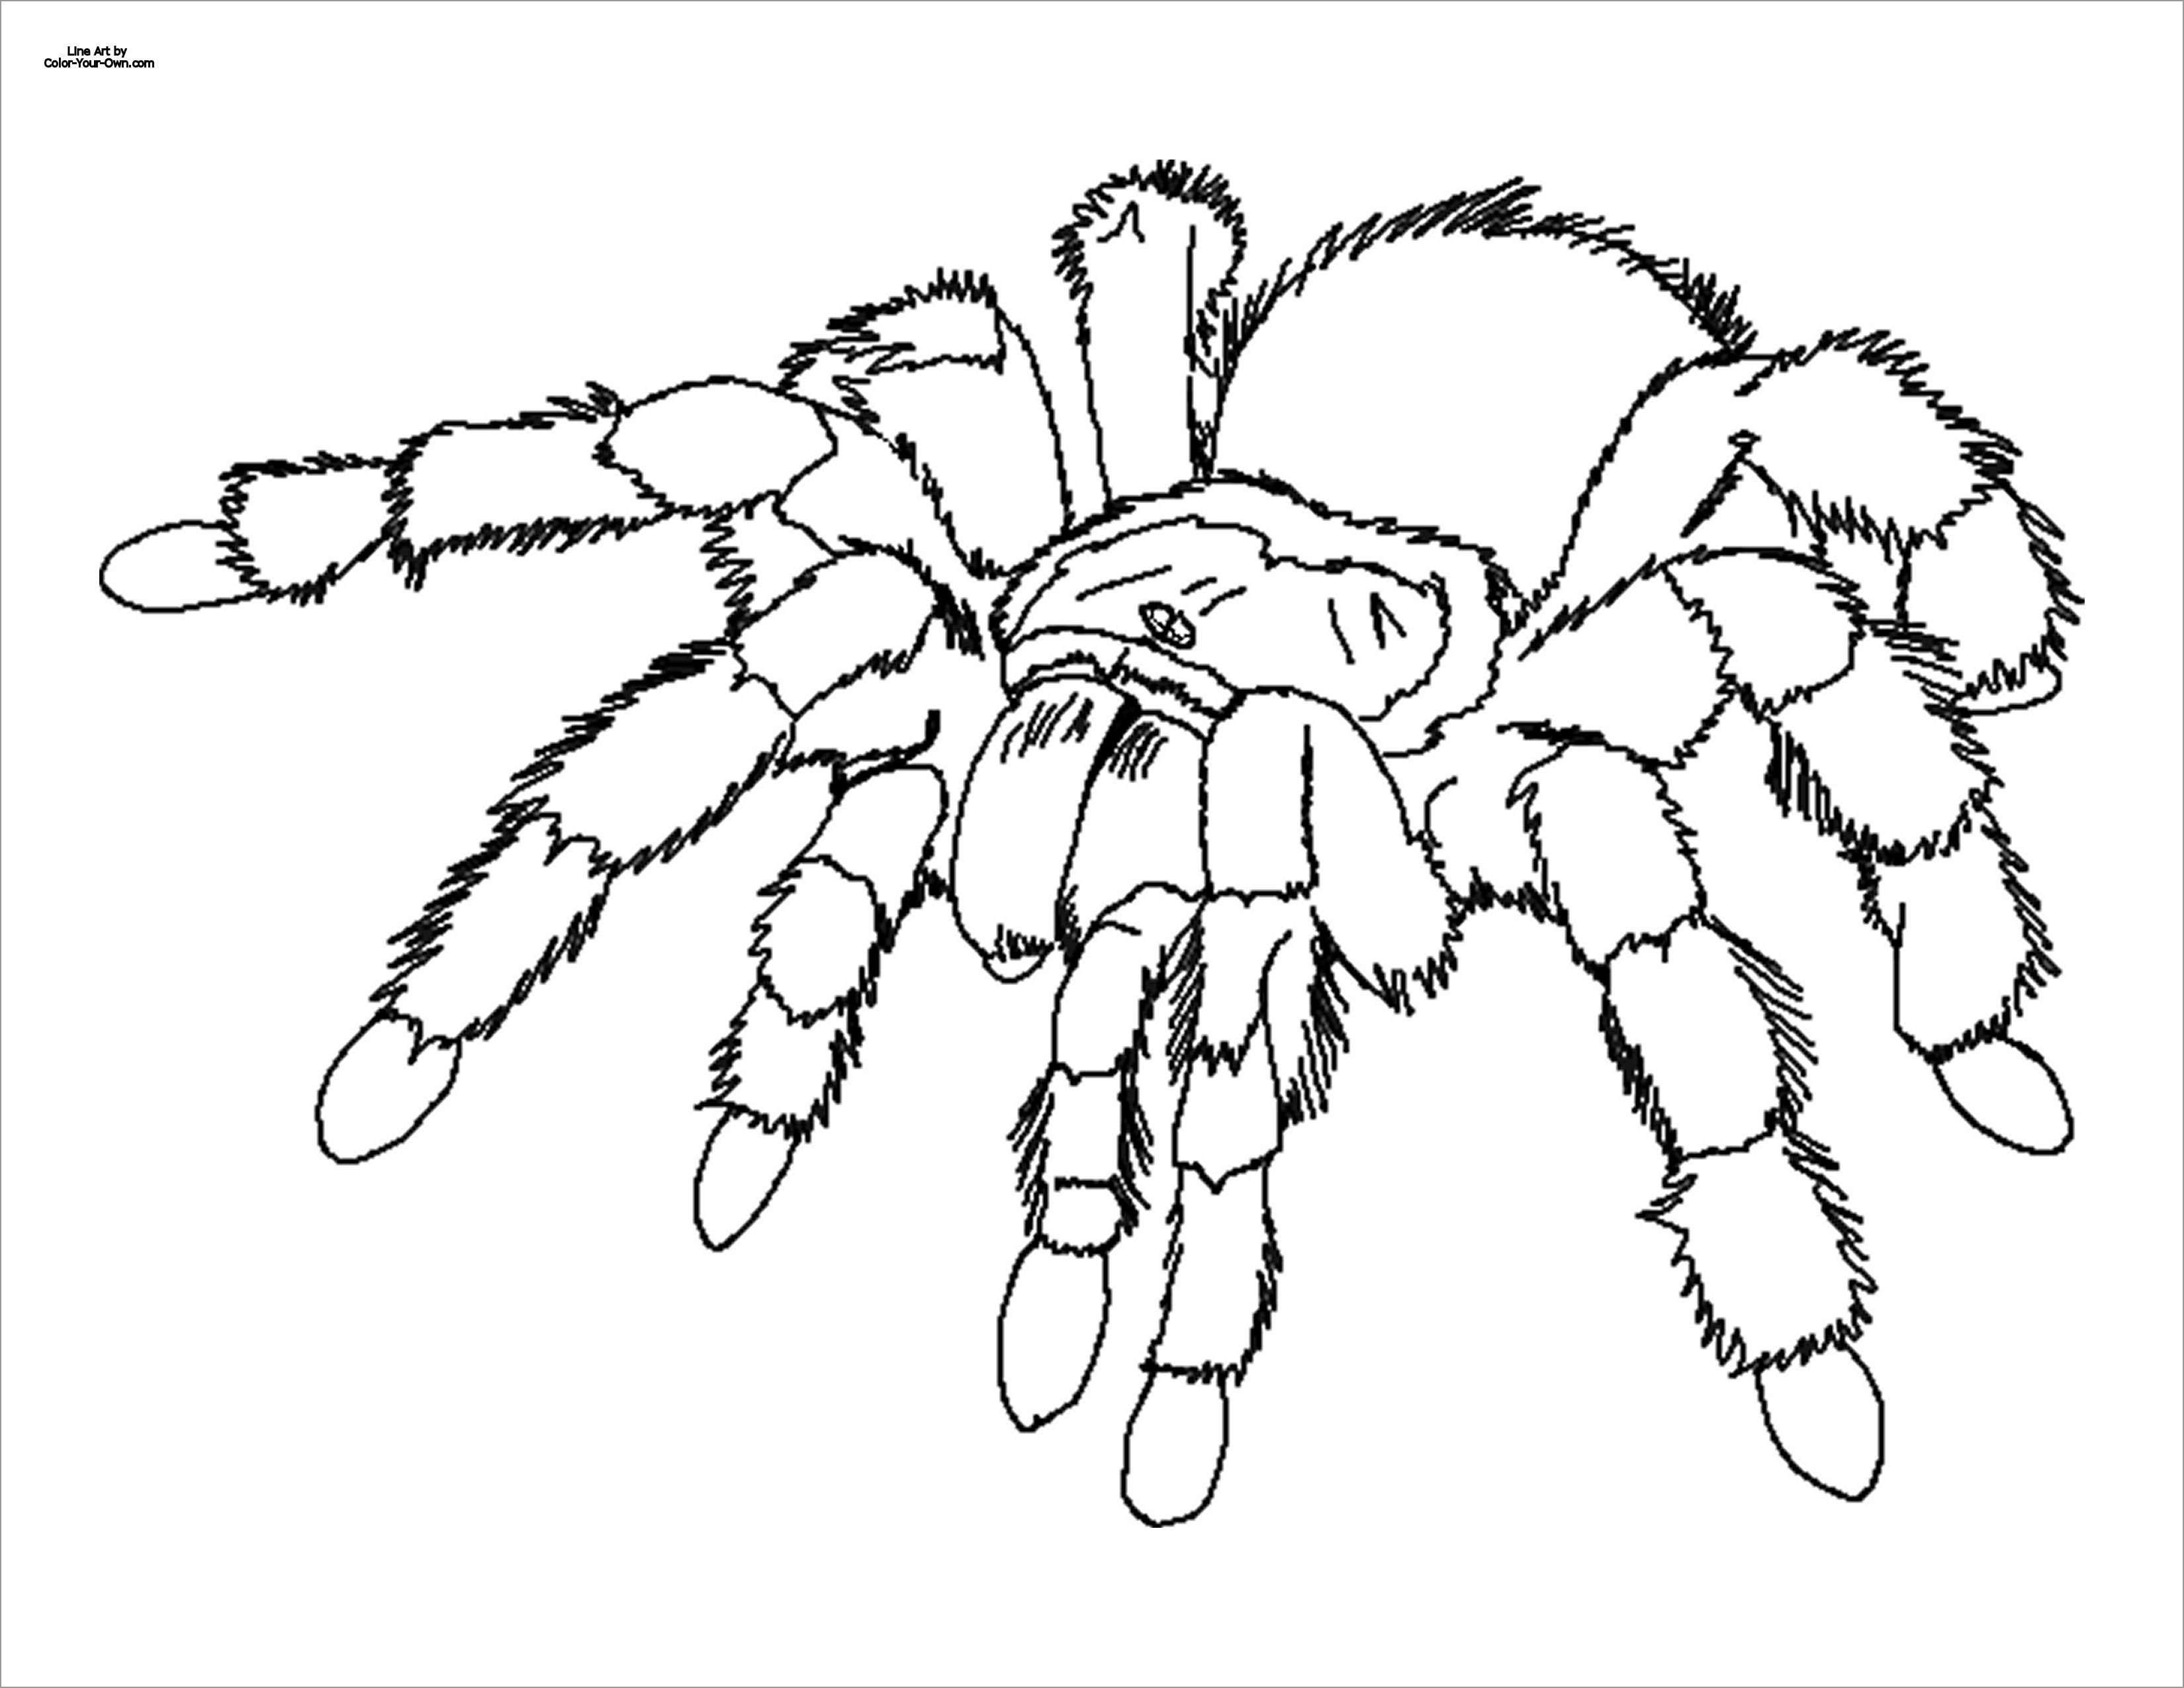 Tarantula Coloring Page for Adult